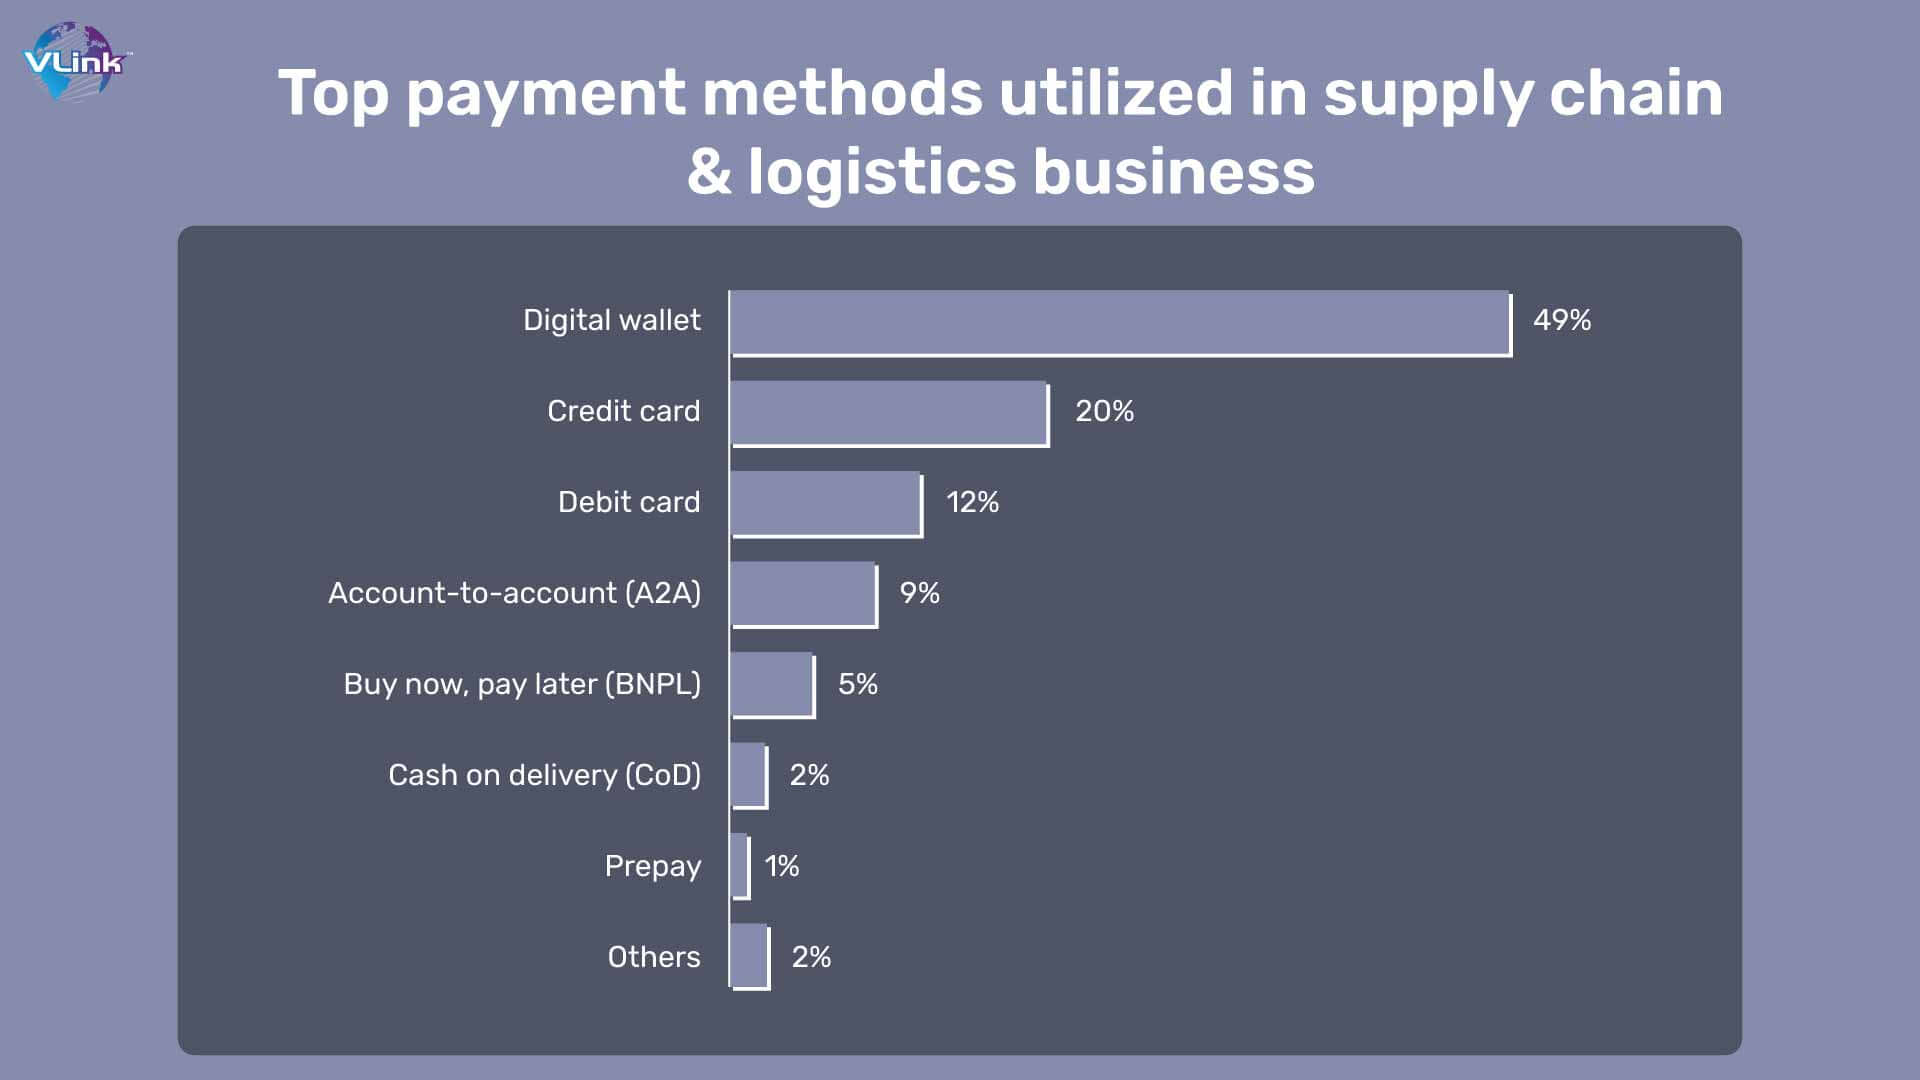 Top payment methods utilized in supply chain & logistics business 